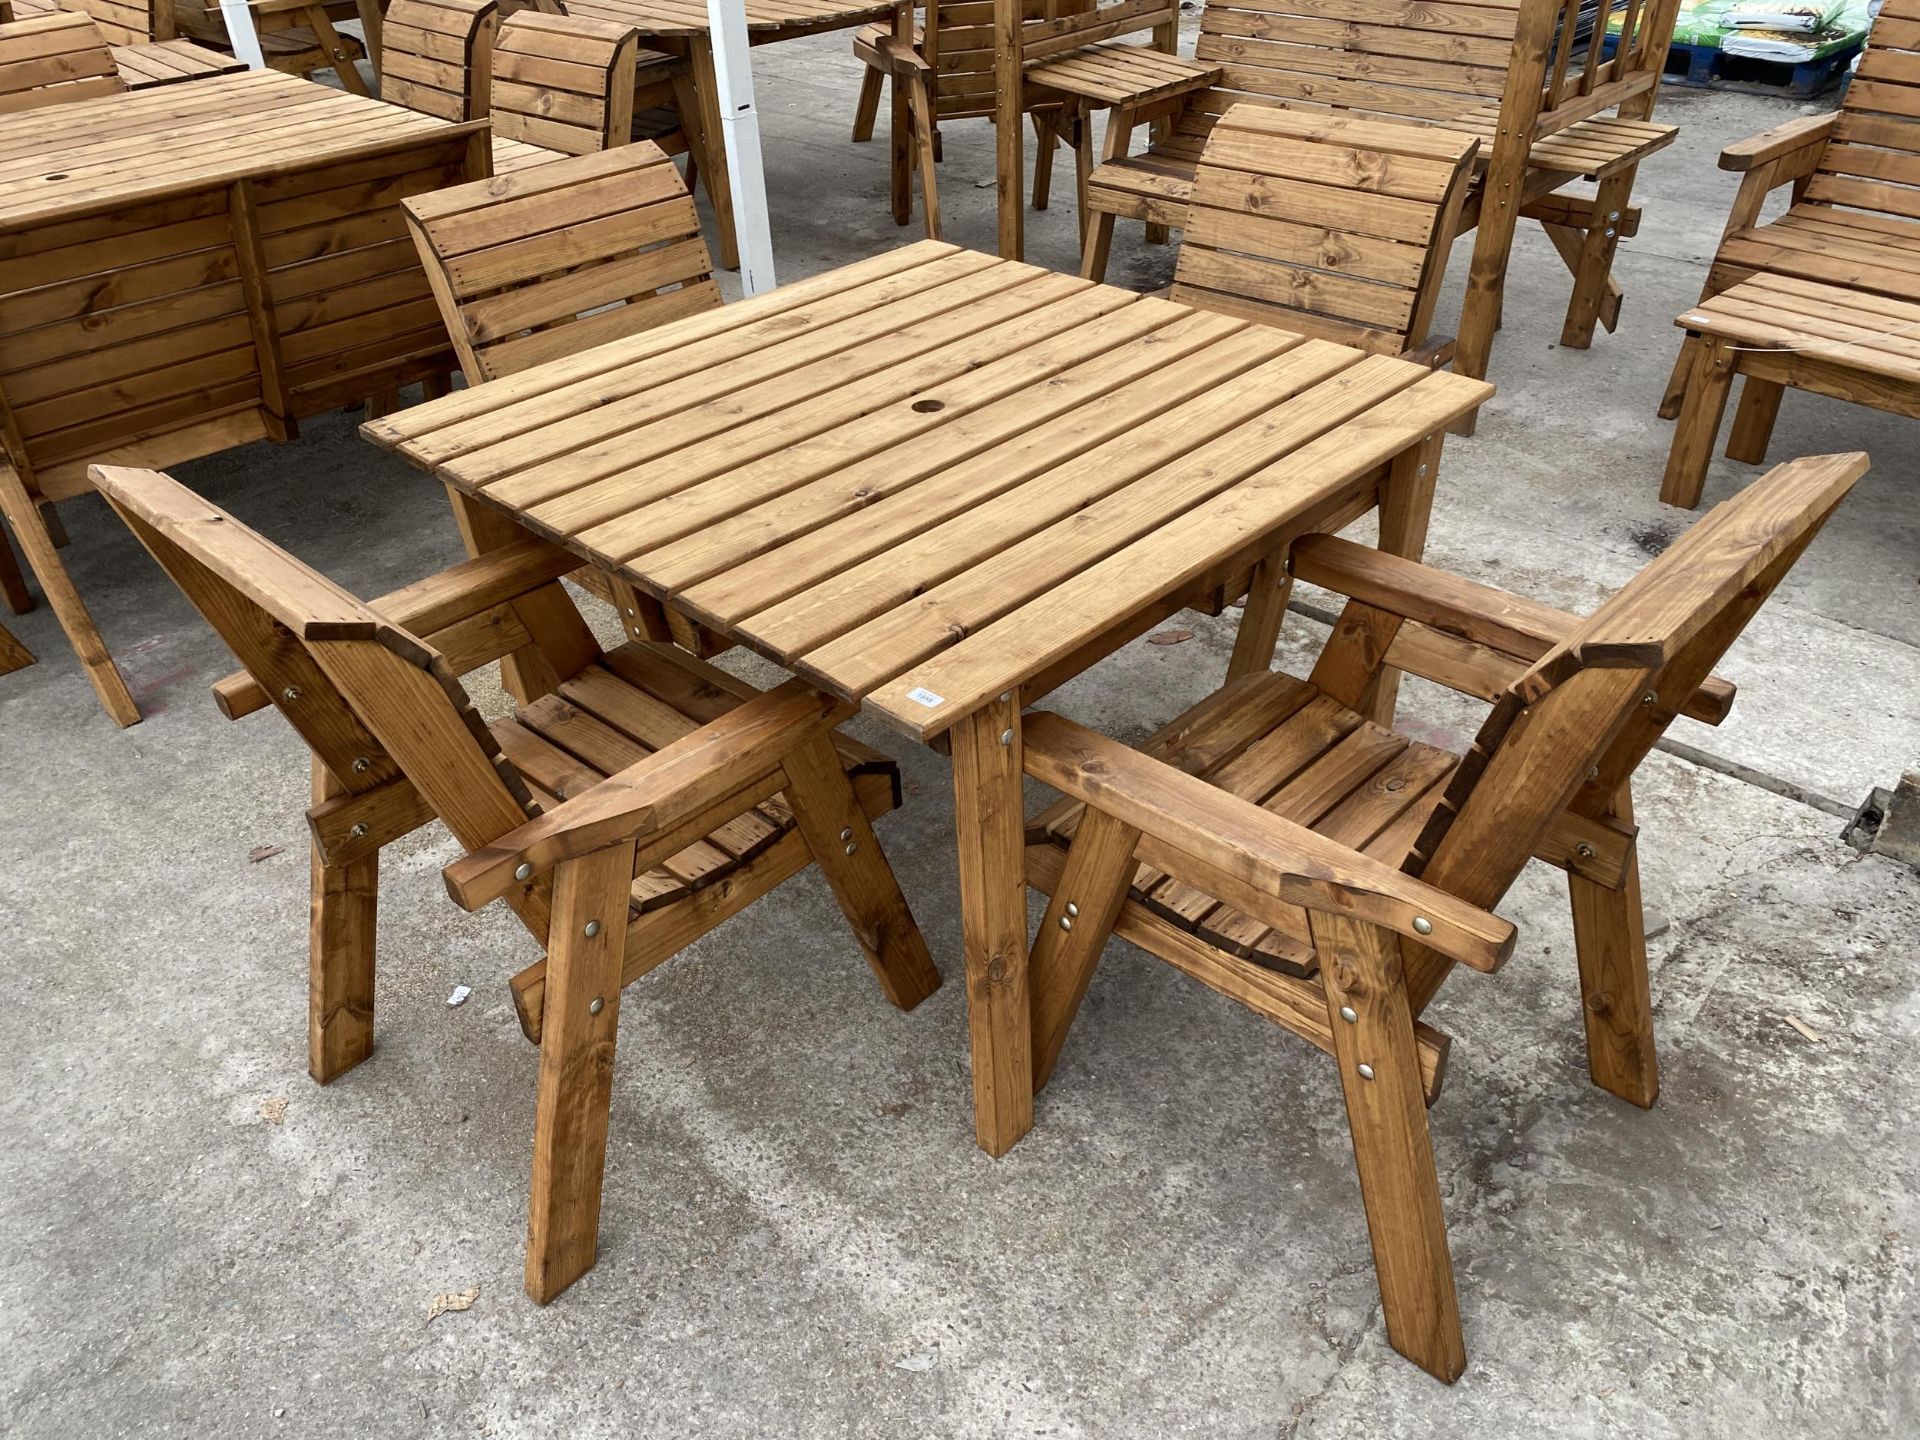 AN AS NEW EX DISPLAY CHARLES TAYLOR PATIO FURNITURE SET COMPRISING OF A SQUARE TABLE AND FOUR CHAIRS